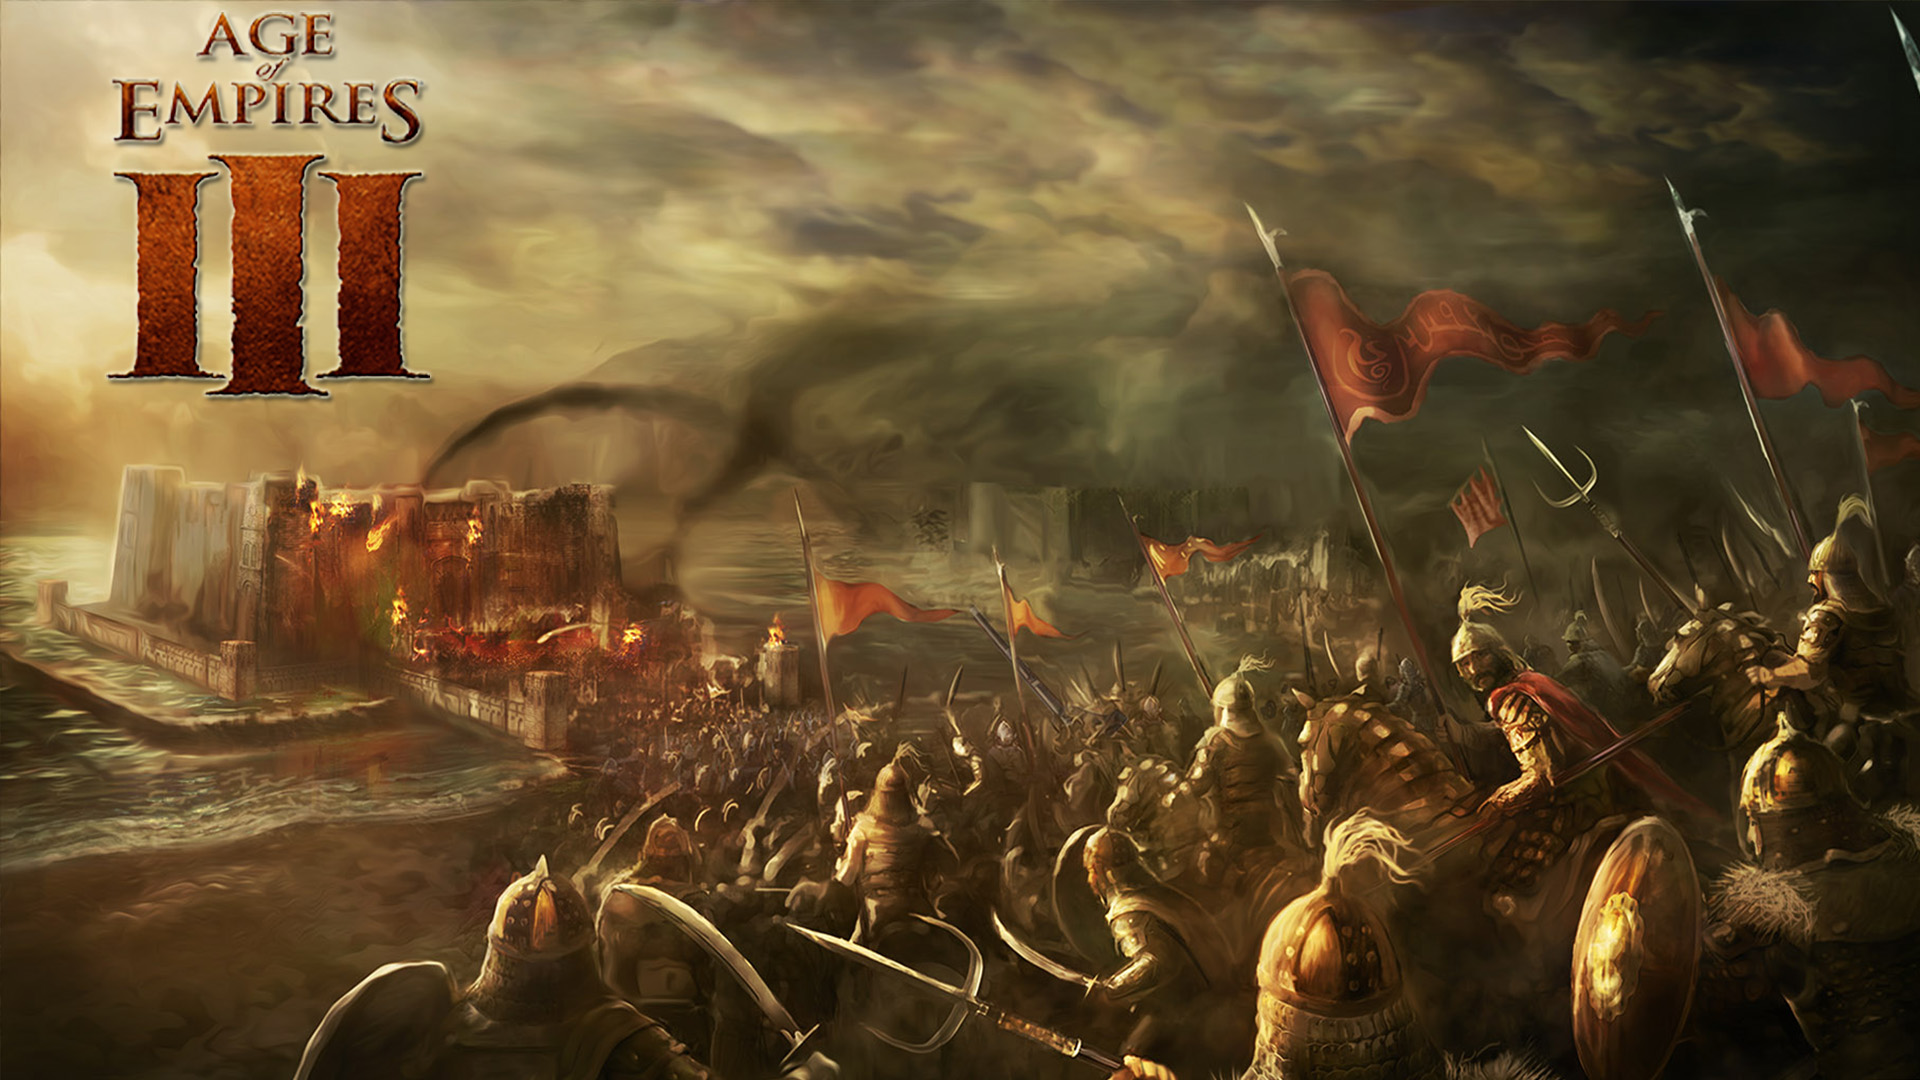 age of empires wallpaper,strategy video game,action adventure game,battle,pc game,cg artwork